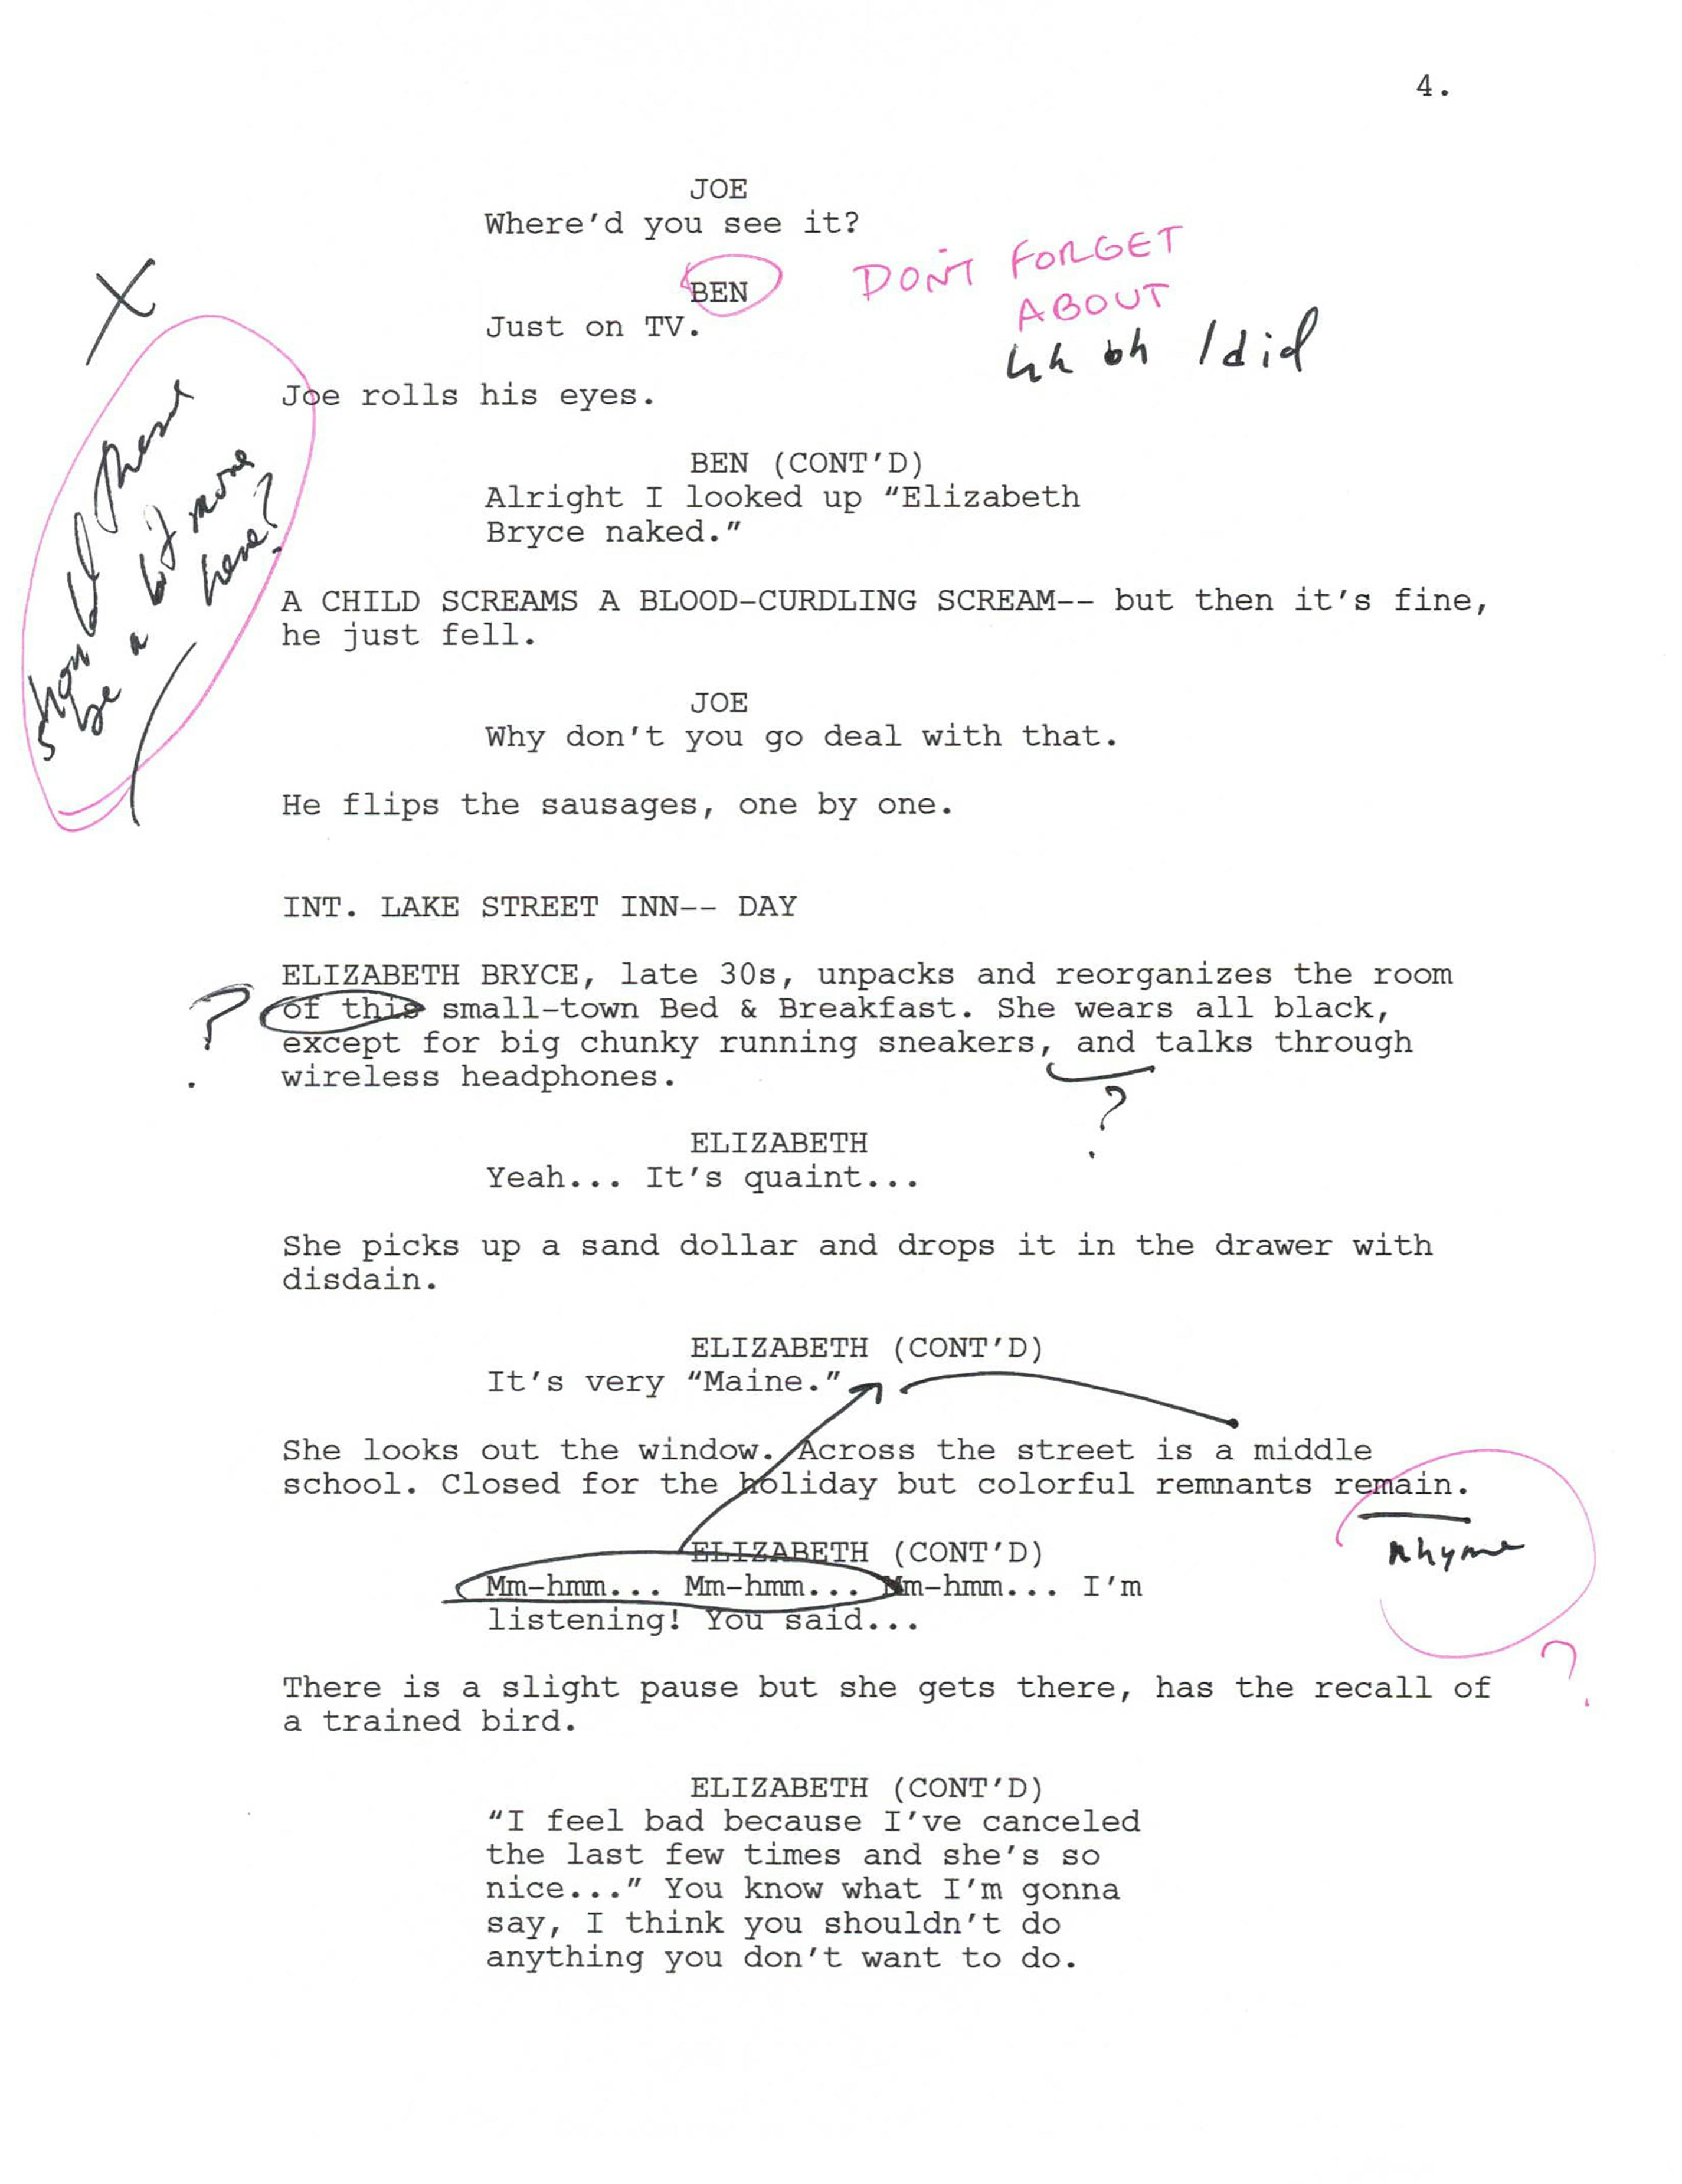 An annotated page from Samy Burch's script.